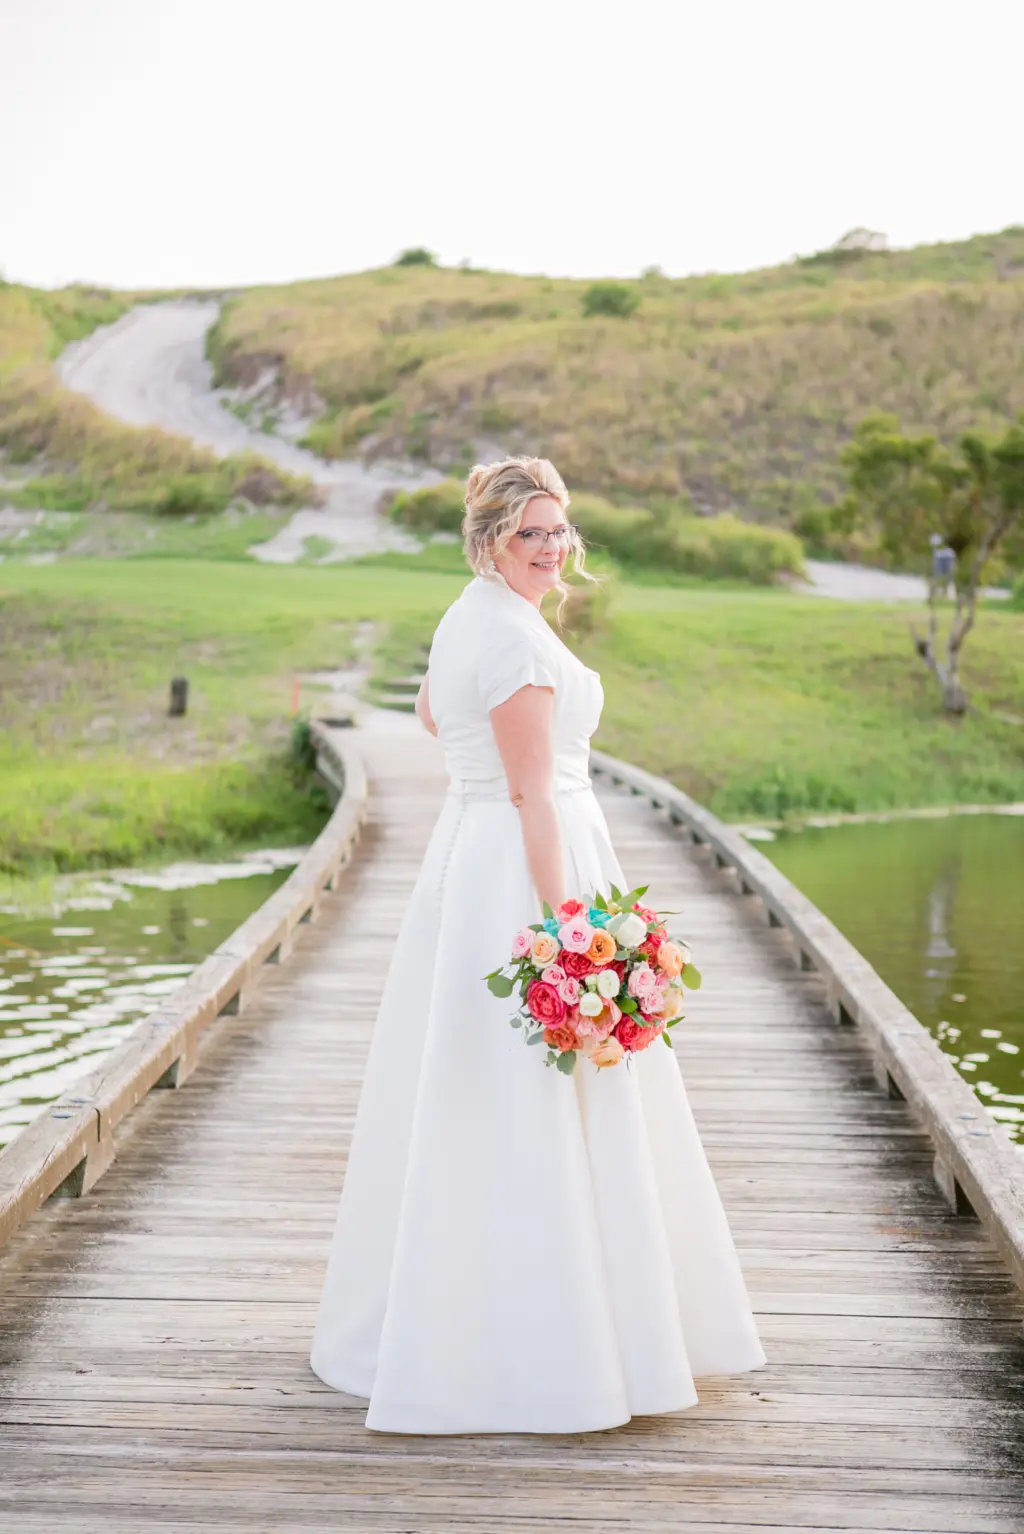 Bride in Cap Sleeve Full Skirt Taffeta Ballgown | Tampa Wedding Dress Truly Forever Bridal Tampa | Colorful Turquoise, Pink, and Coral Summer Wedding Floral Inspiration | Tampa Florist Monarch Events and Designs